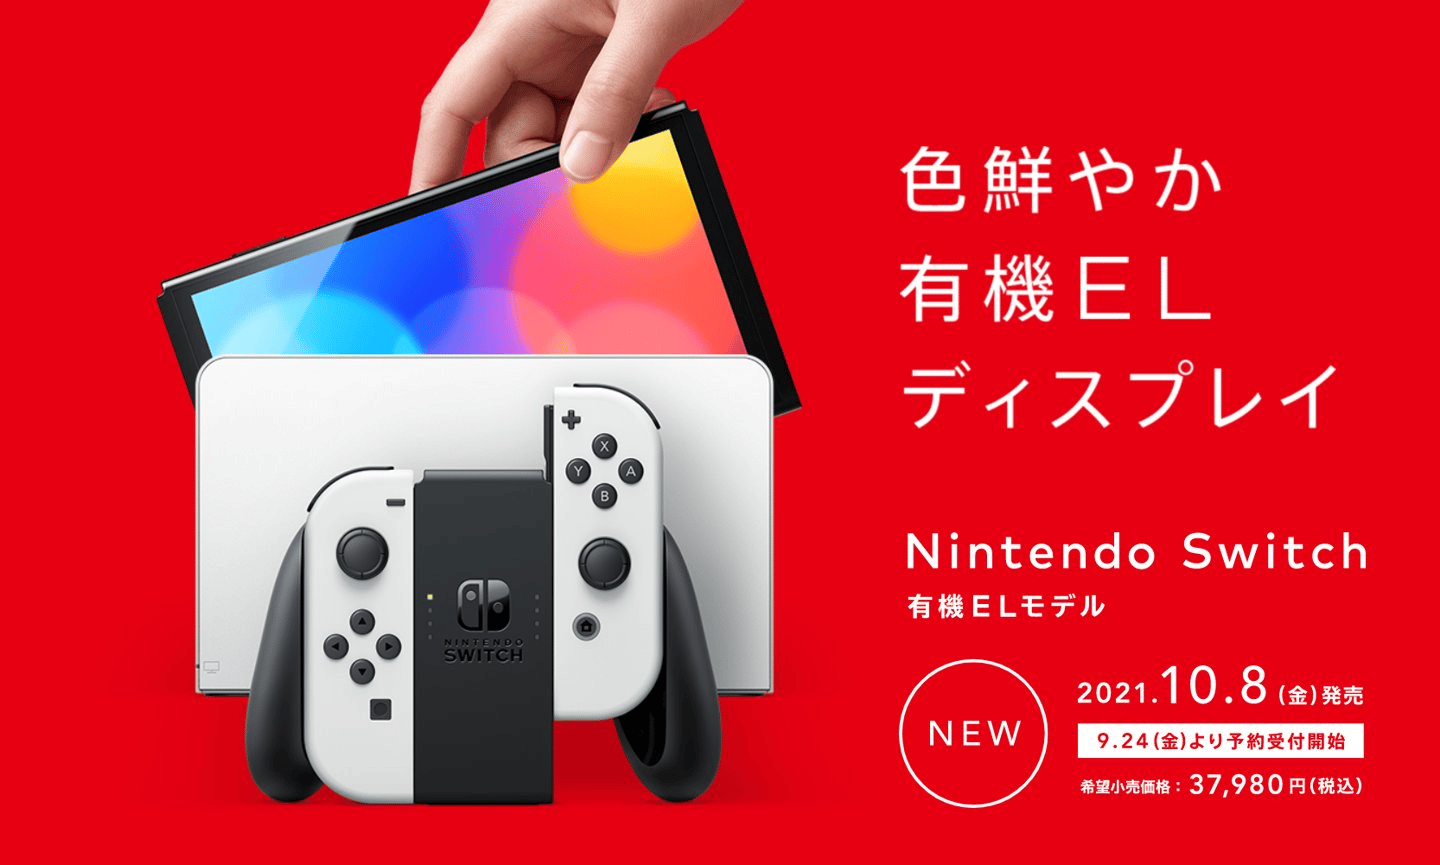 Switch OLED will be available for pre-order on September 24